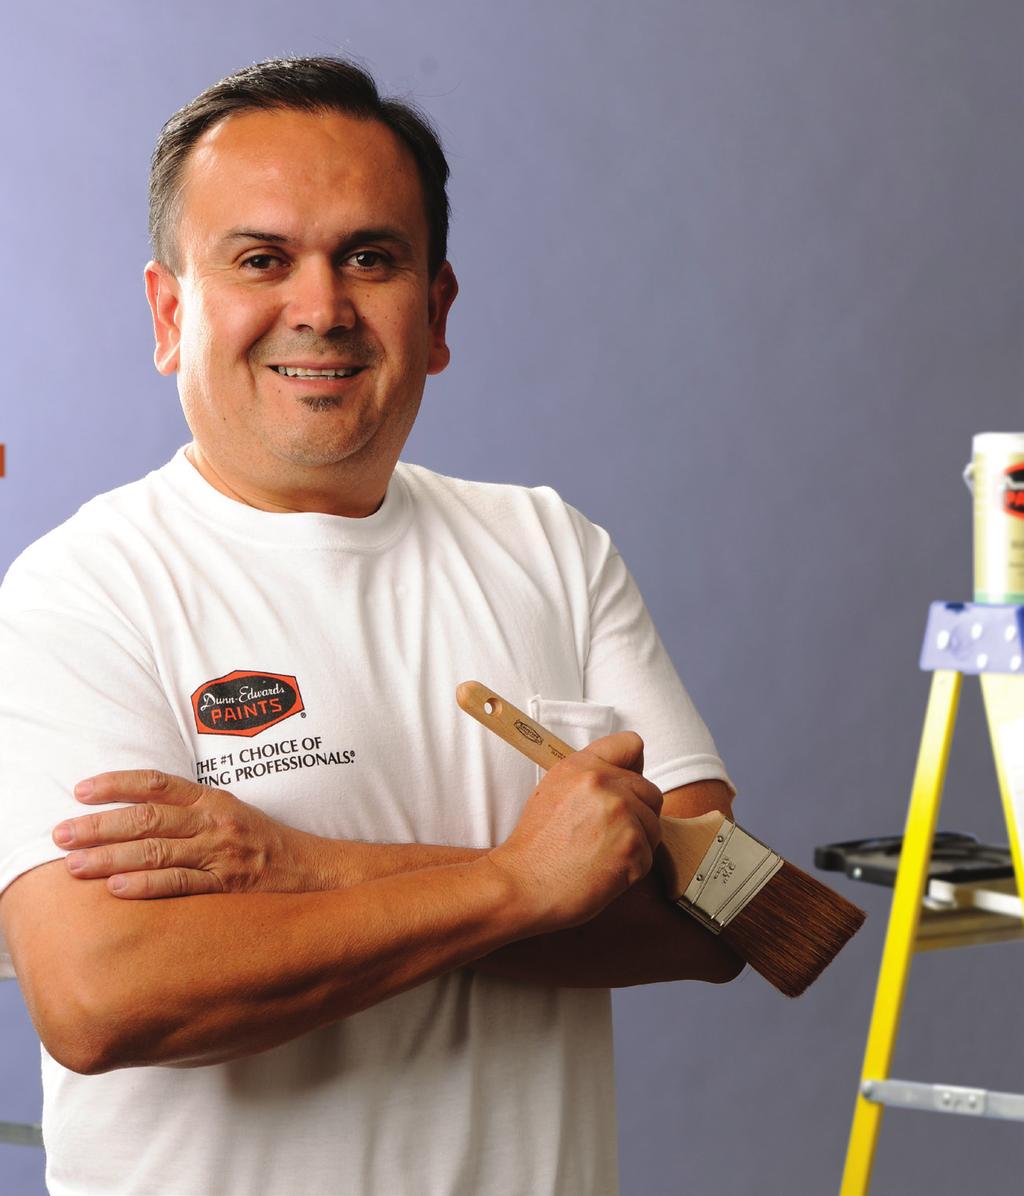 We recognize that our relationship with paint contractors is based on more than what s in a can of paint. We stand ready to provide the best product and service to support your business.